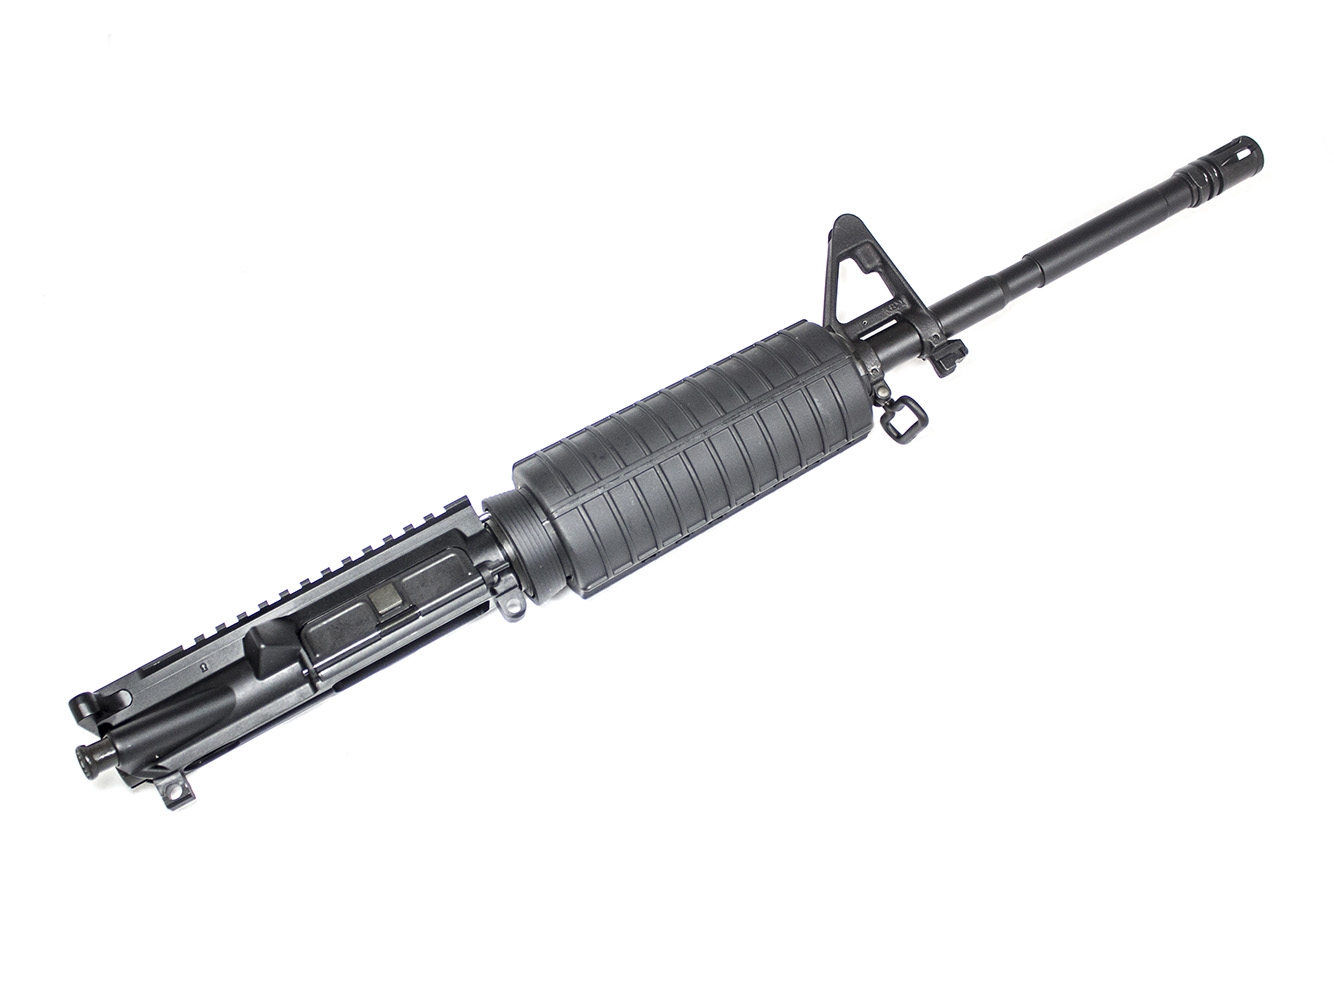 CMMG CMMG Upper Group, Mk4LE, 5.56mm